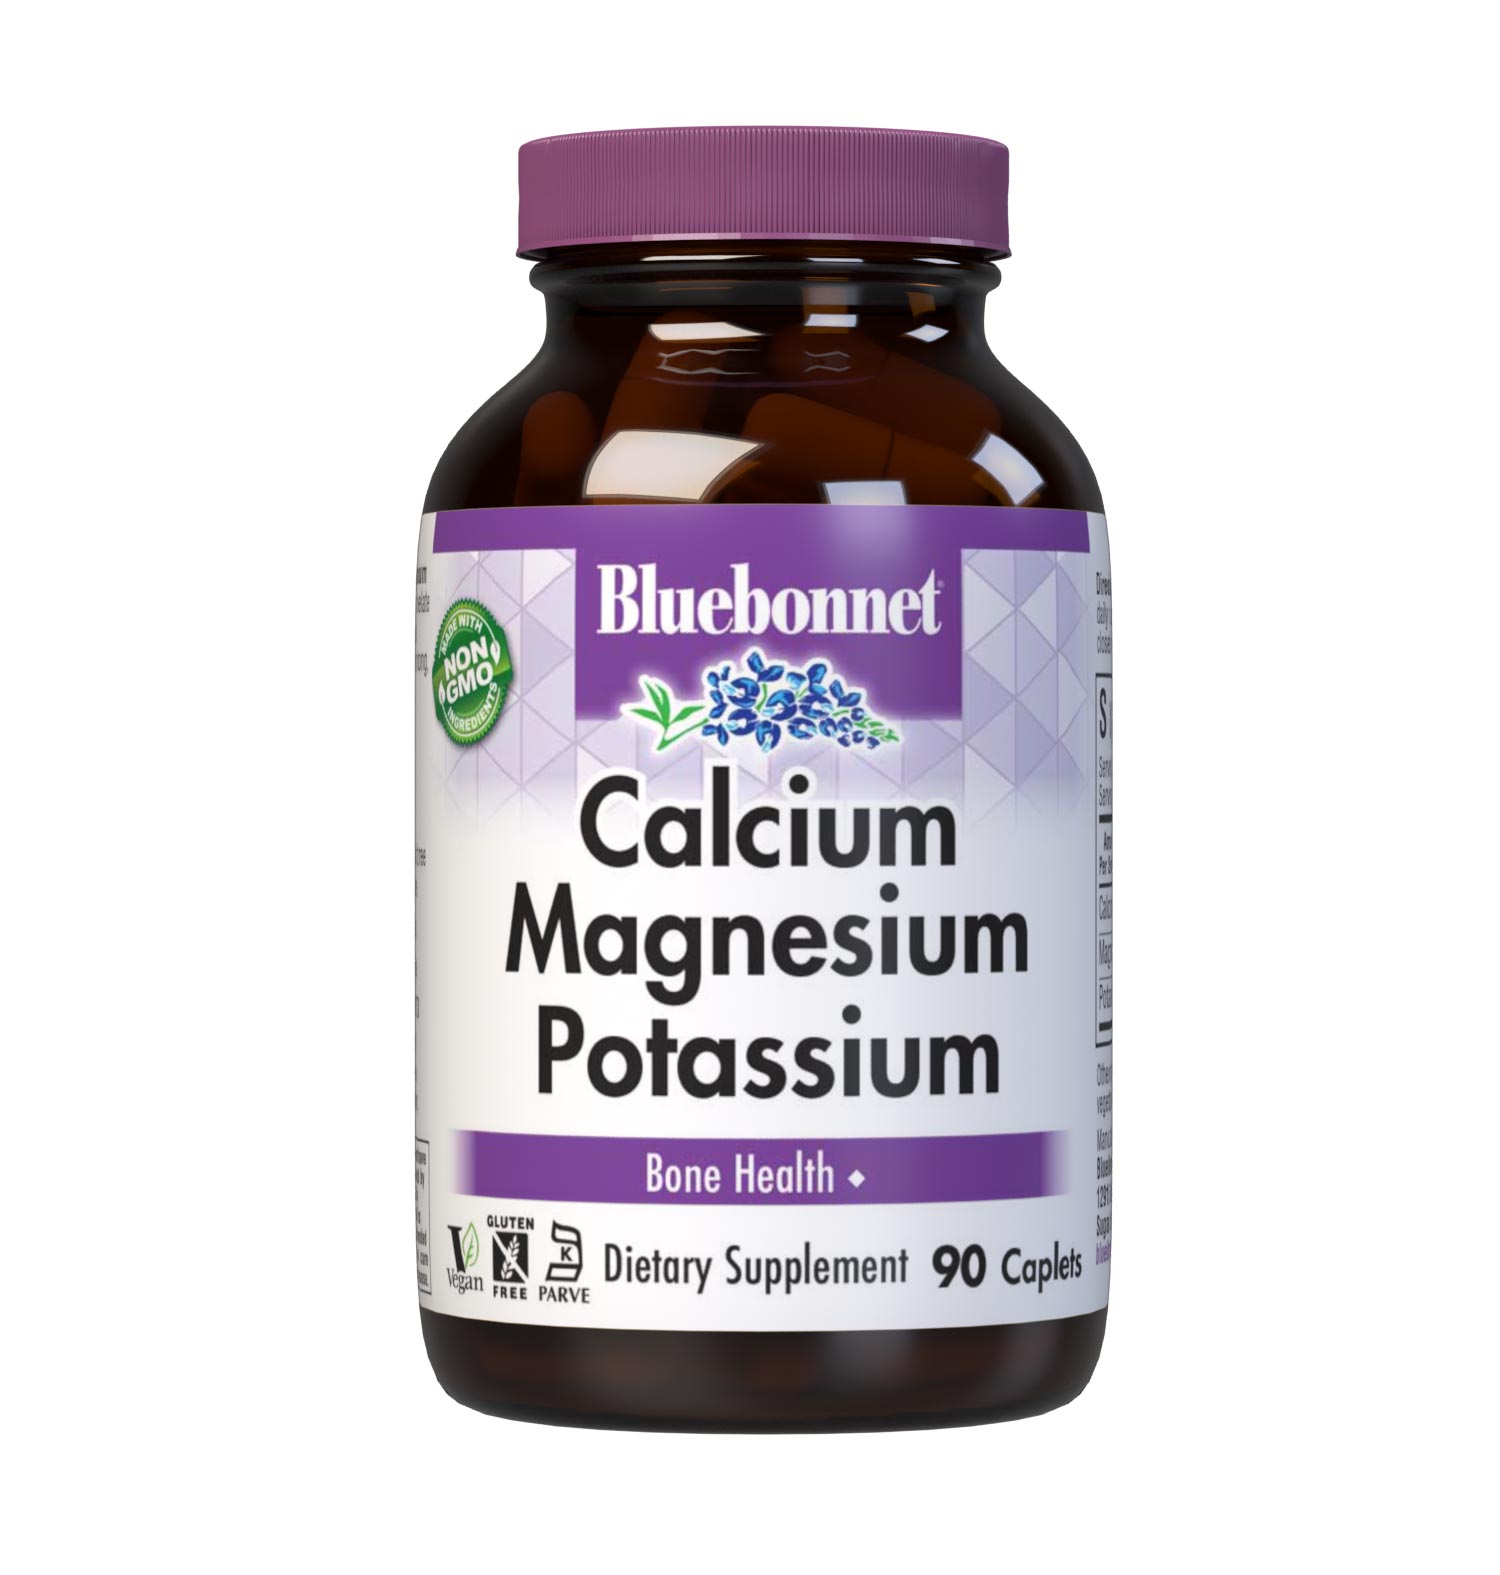 Bluebonnet's Calcium Magnesium Potassium 90 Caplets are formulated with calcium in a chelate of calcium citrate along with fully reacted magnesium and potassium aspartate for strong, healthy bones. #size_90 count